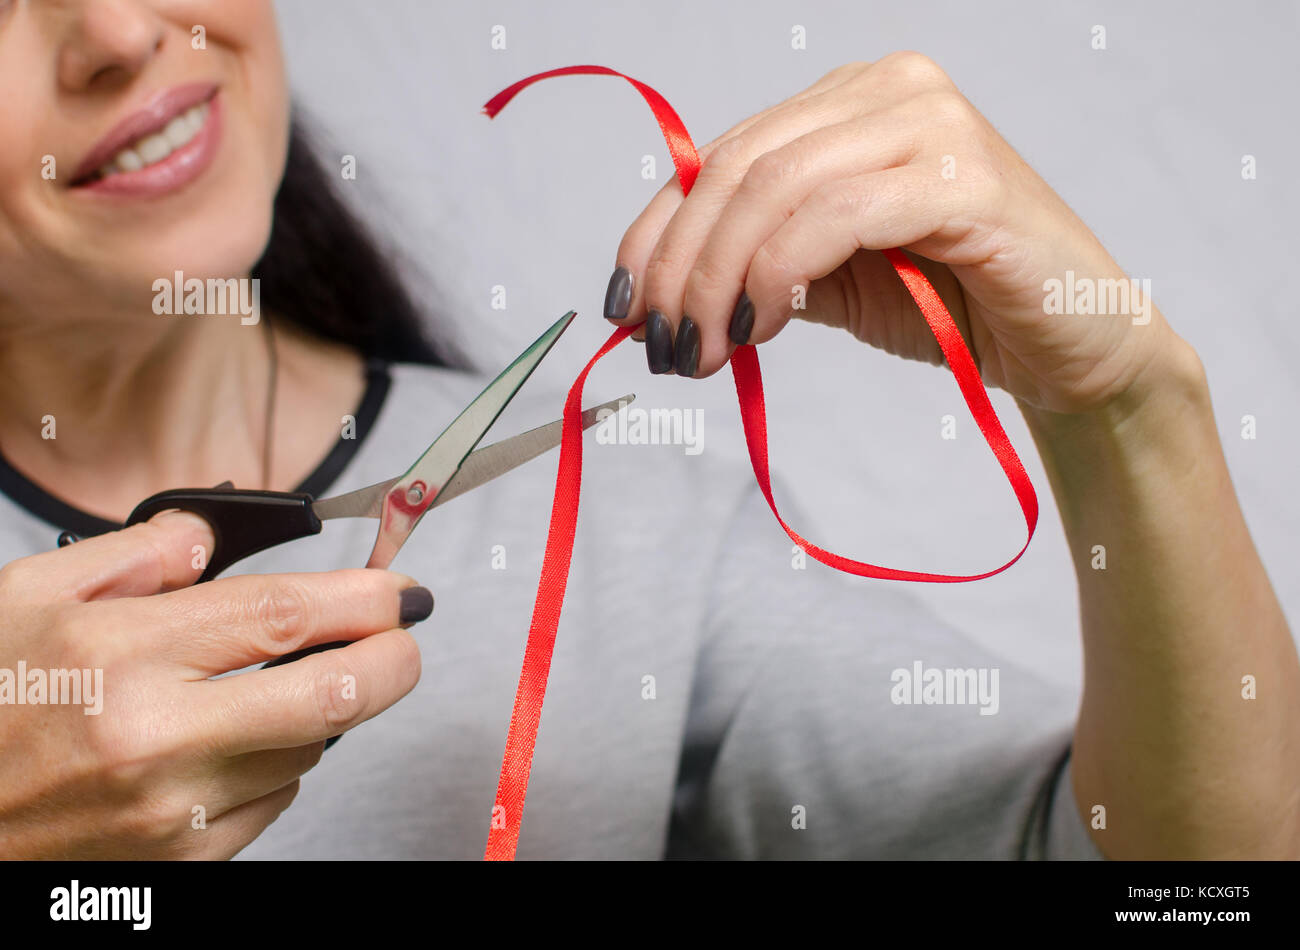 woman cuts a red ribbon with scissors to make a decoration Stock Photo